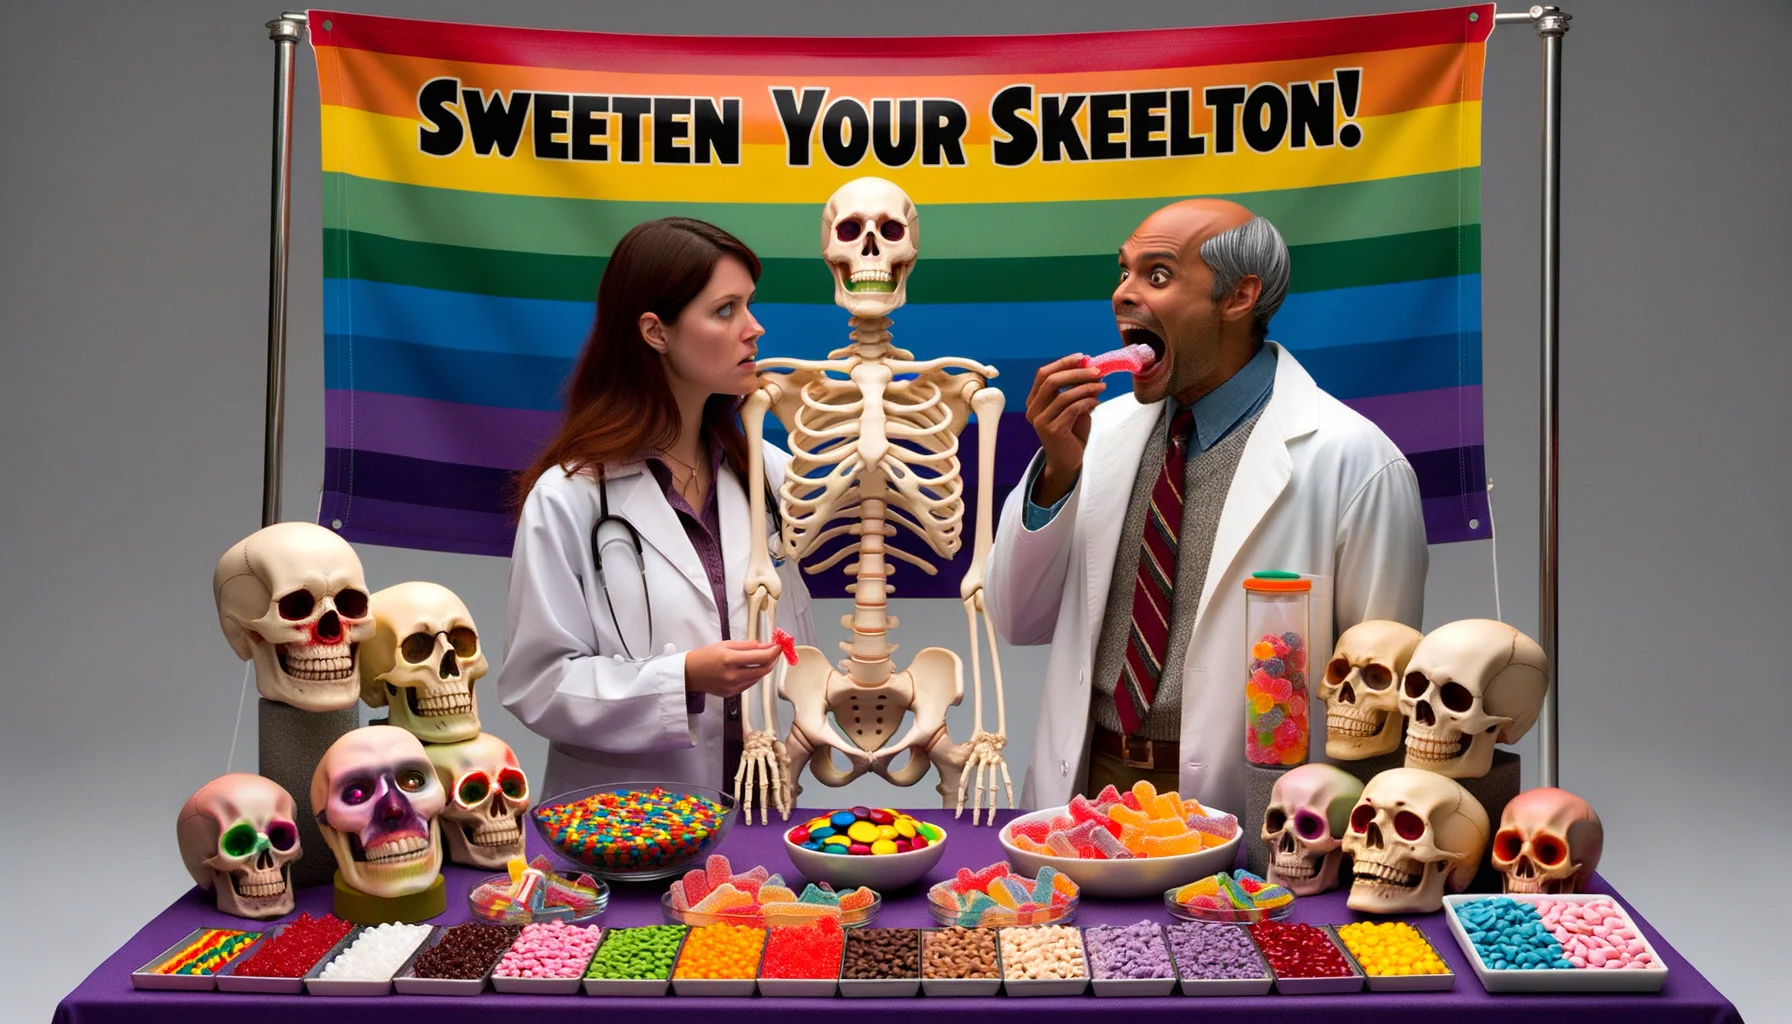 Imagine a humorous, ultra-realistic scene at a health fair. A South Asian woman in a white lab coat stands behind a colorful booth, inscribed with the bold letters 'Sweets for Bone Density Improvement.' Her table is laden with an array of colorful candies and sweets, all shaped like different bones - femurs, tibias, skulls, and more. To her side, a Caucasian man is biting into a pelvis-shaped gummy, his face twisting in surprise, baffled but enjoying the concept. In the backdrop, a rainbow banner proclaims the catchphrase: 'Sweeten Your Skeleton!'